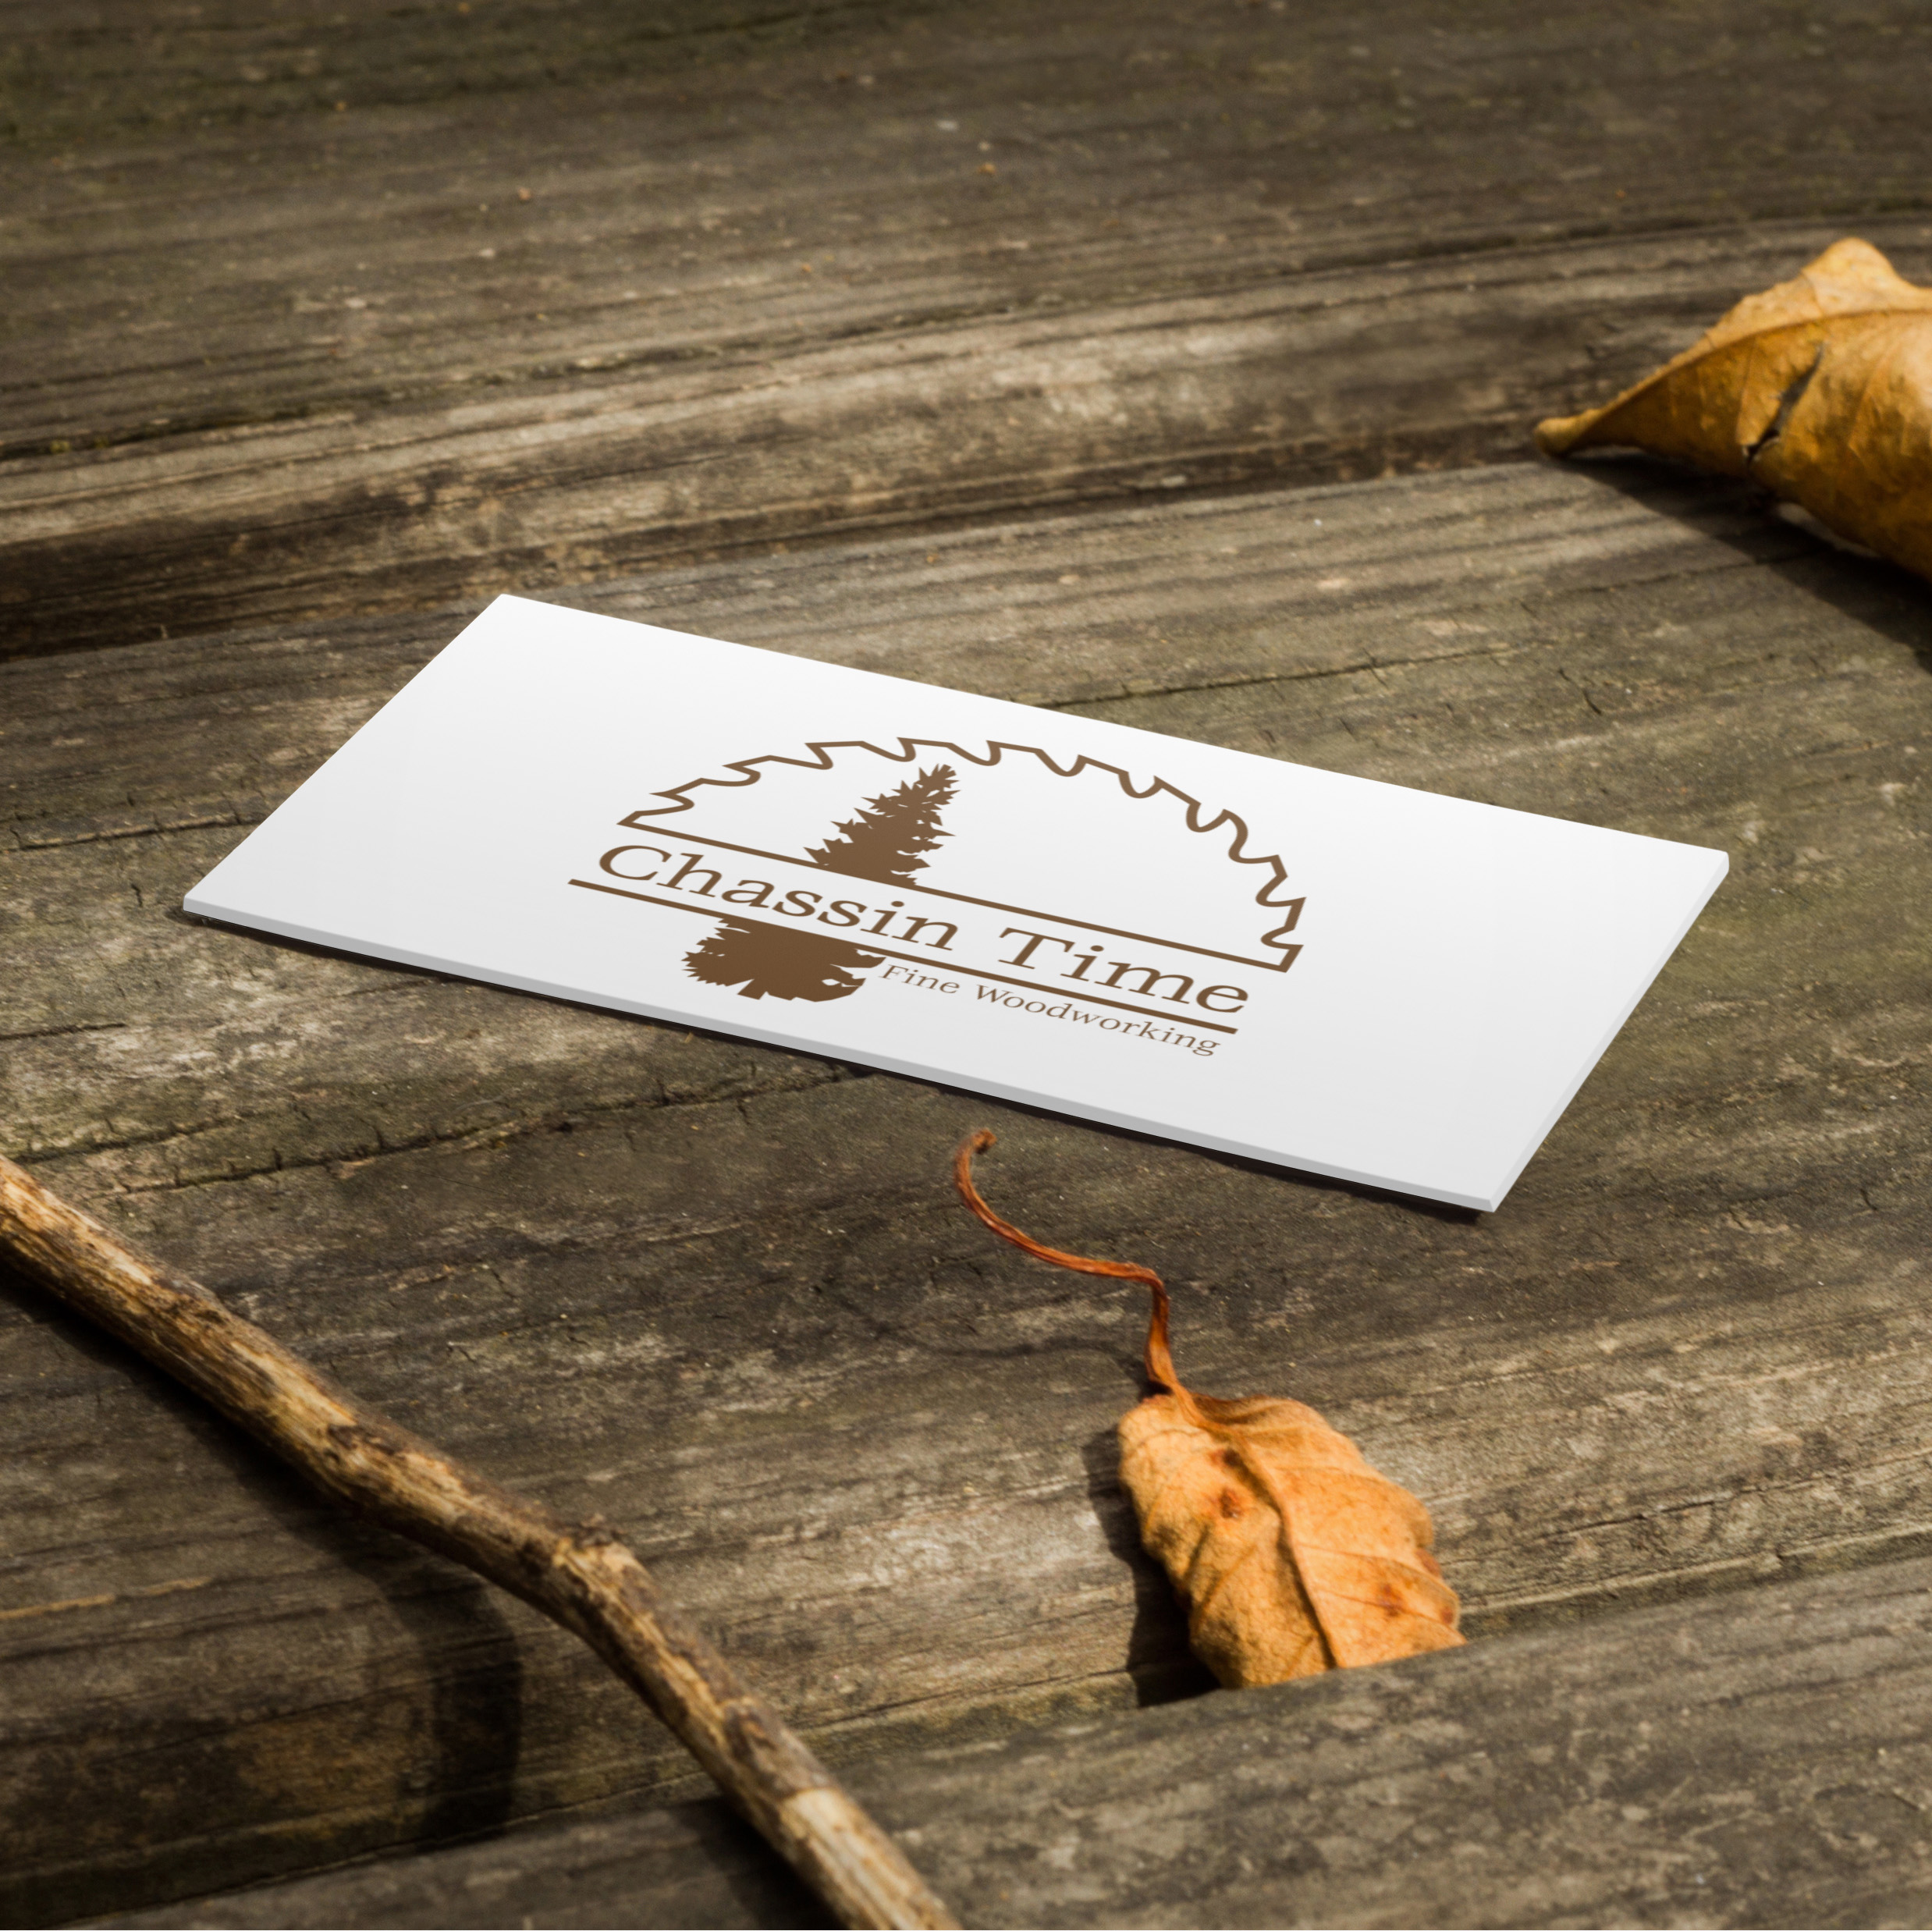 A business card with a logo